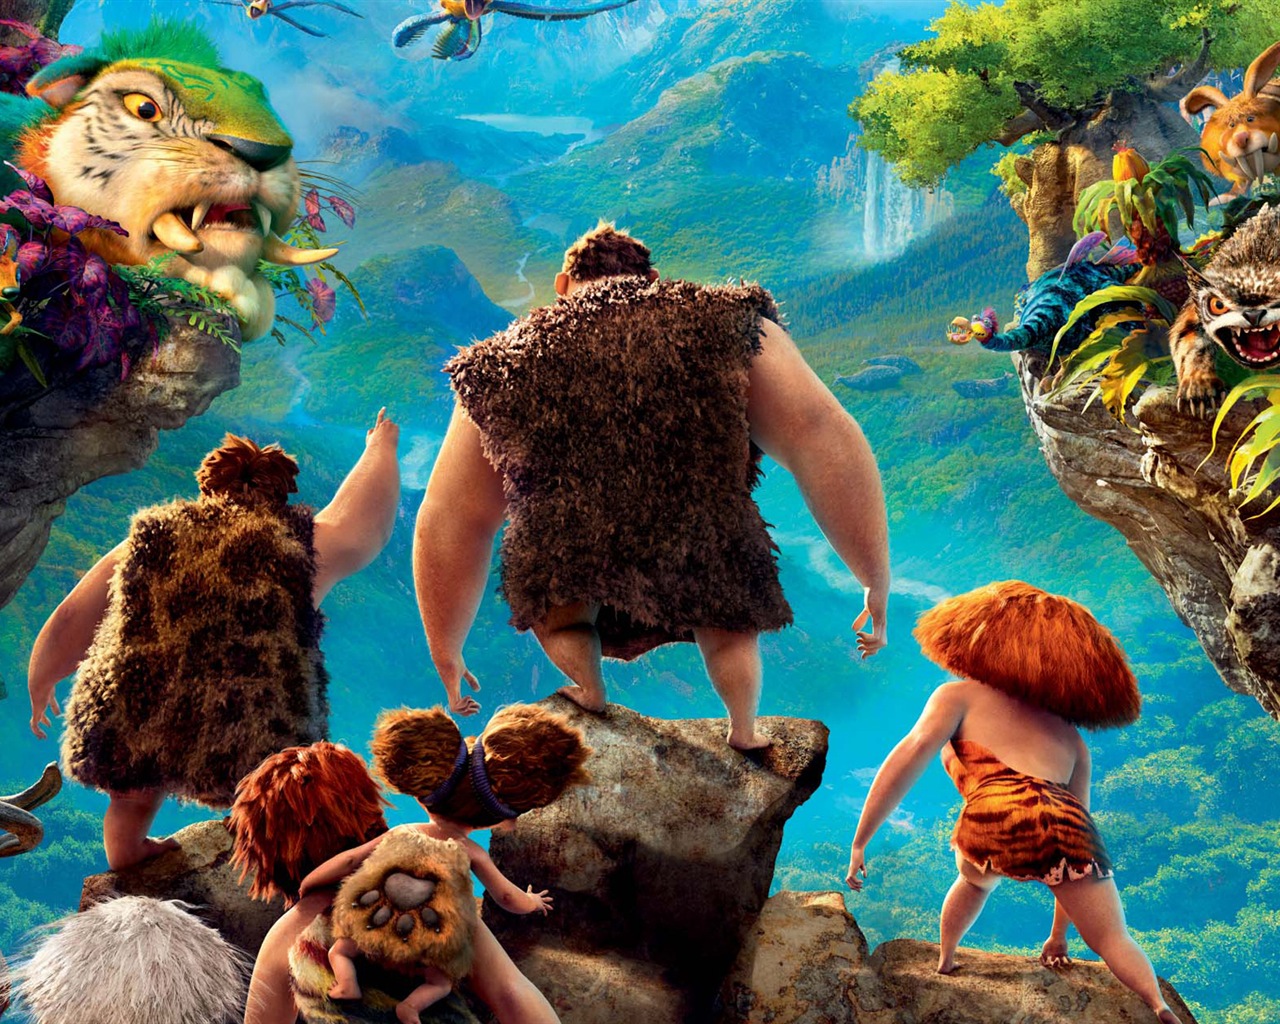 The Croods HD movie wallpapers #5 - 1280x1024